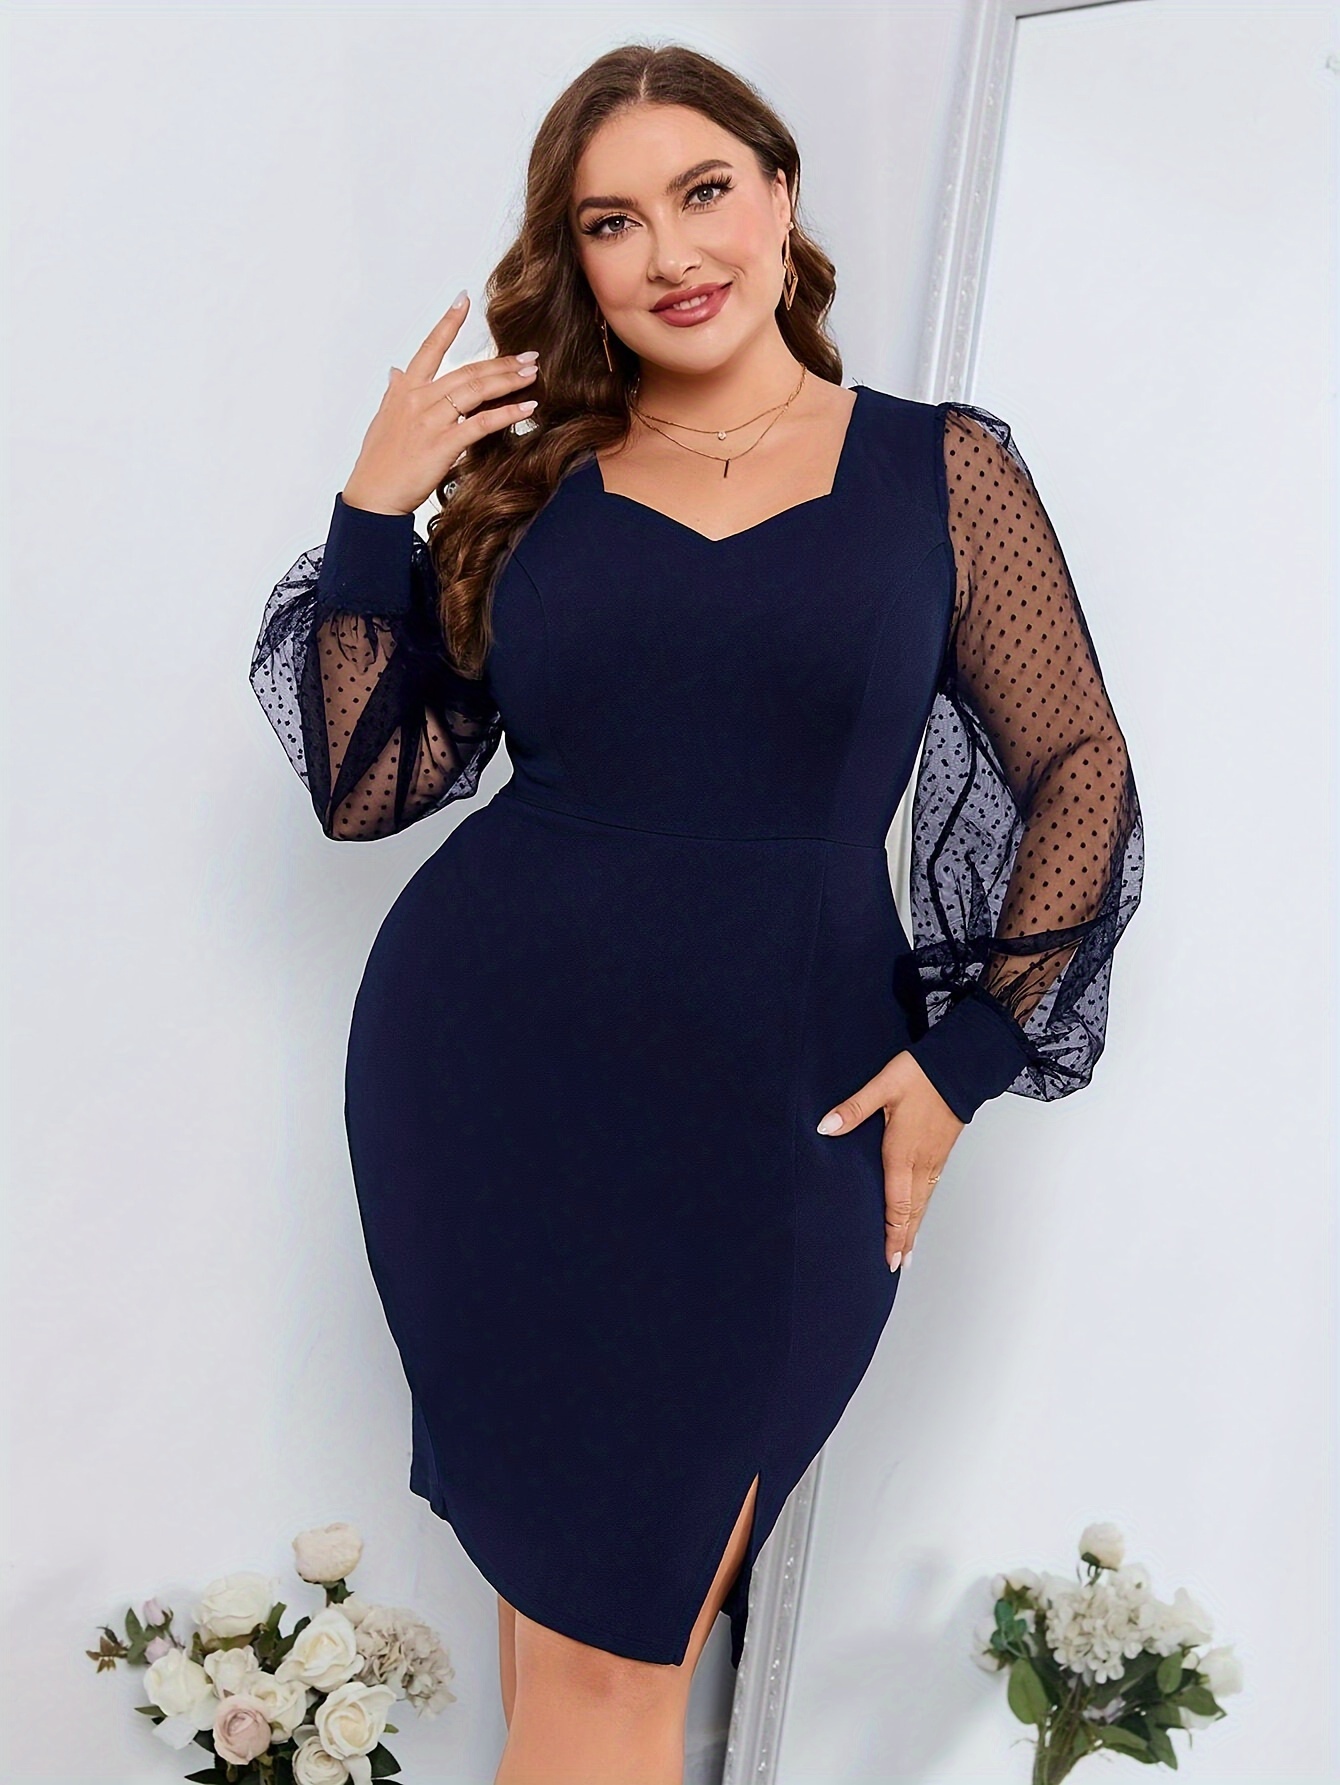 Plus Size Navy Blue Lace  Semi Formal Dresses With Half